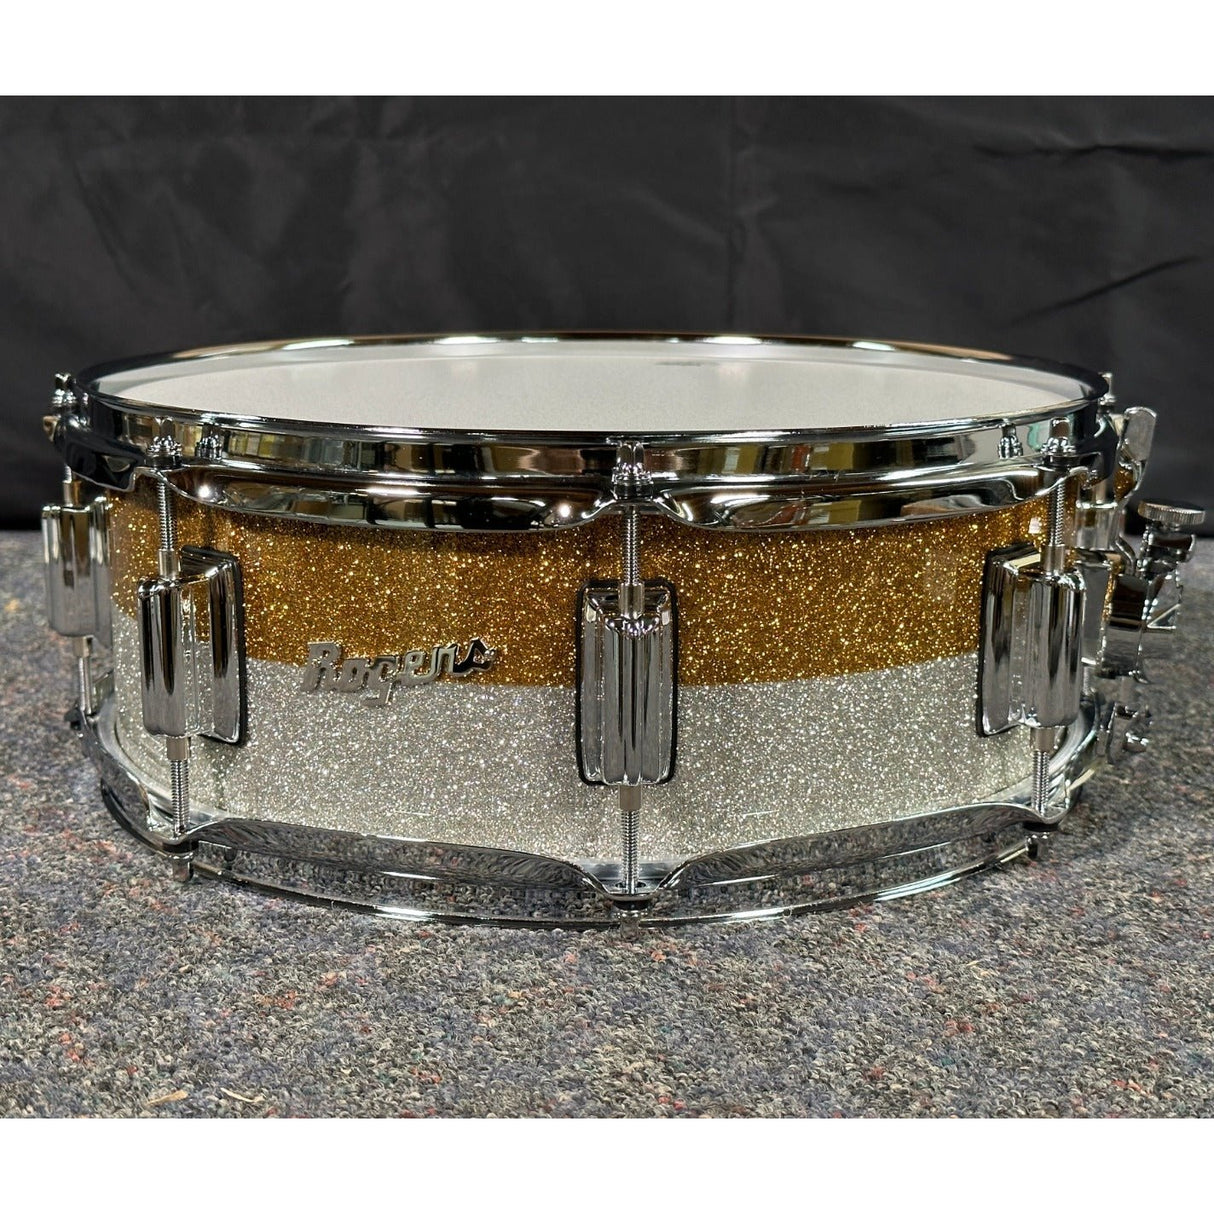 Used Rogers Powertone Limited Edition Snare Drum 14x5 Gold/Silver Two-Tone Lacquer